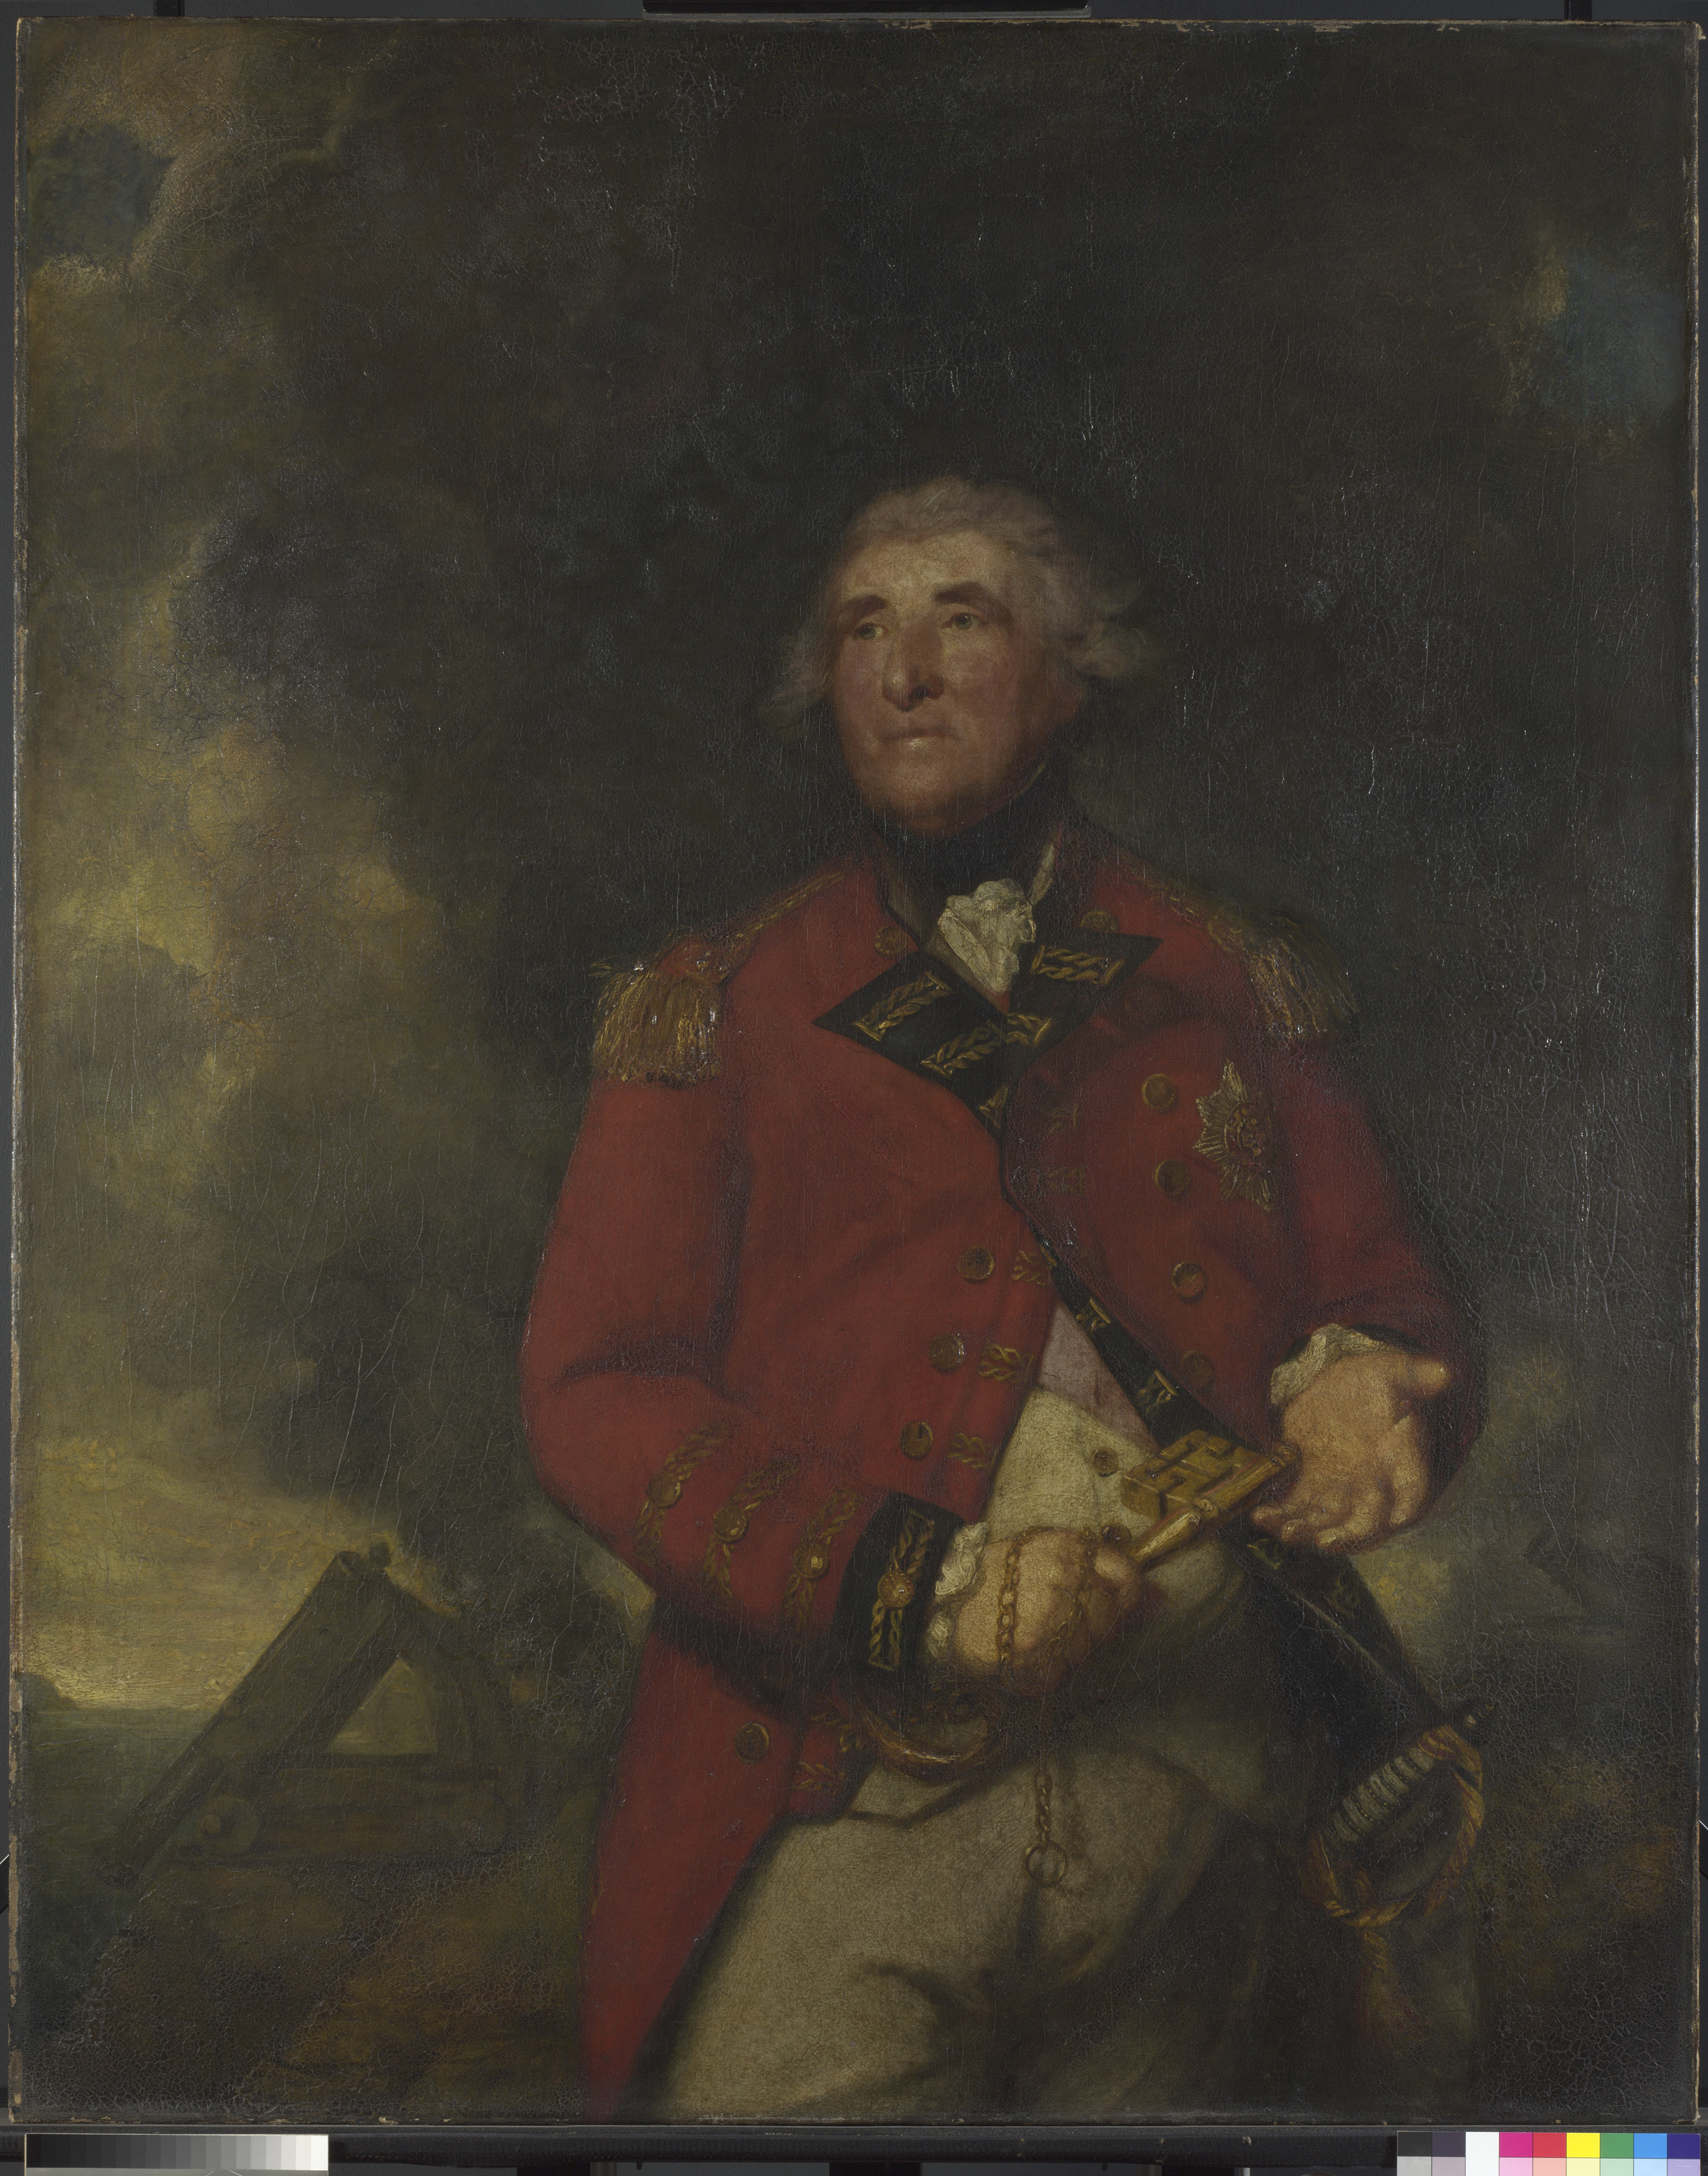 A portrait of a man wearing a red jacket over a white waistcoat and trousers. He holds a key and carries a sword. He stands against a distant landscape and a dark, cloudy sky.